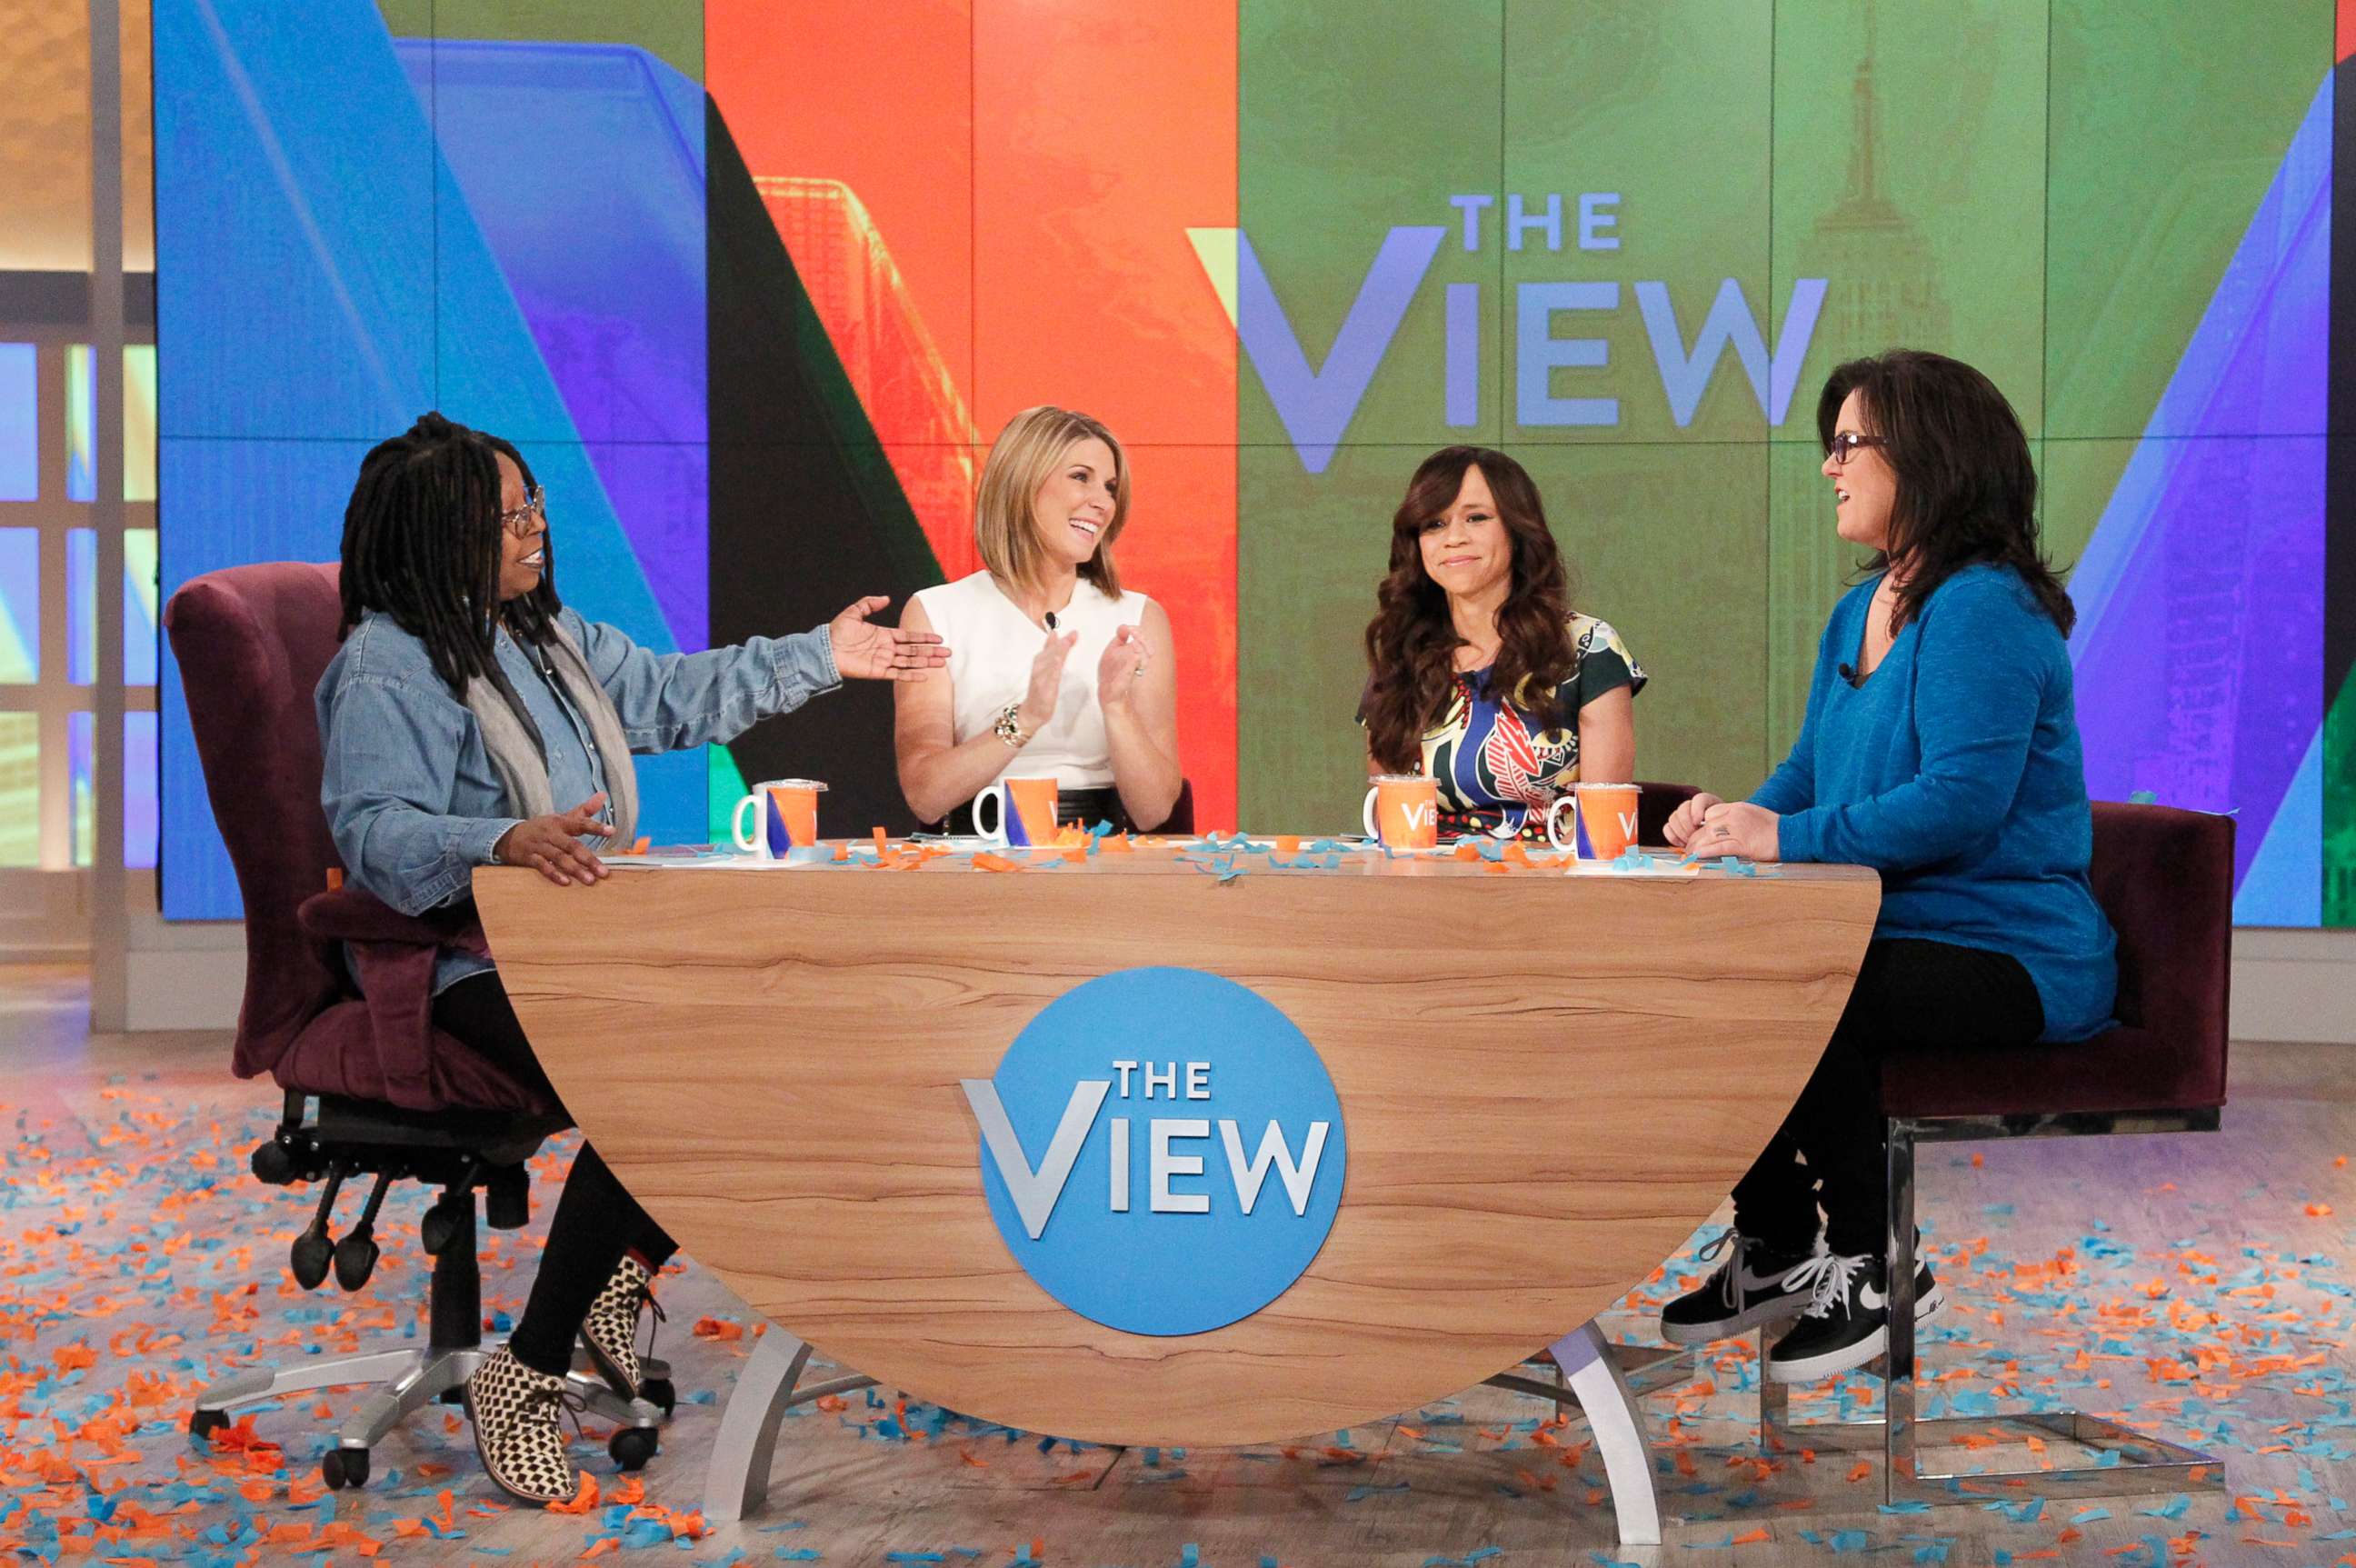 PHOTO: "The View" co-hosts Whoopi Goldberg, Nicolle Wallace, Rosie Perez and Rosie O'Donnell on Tuesday, February 3, 2015.